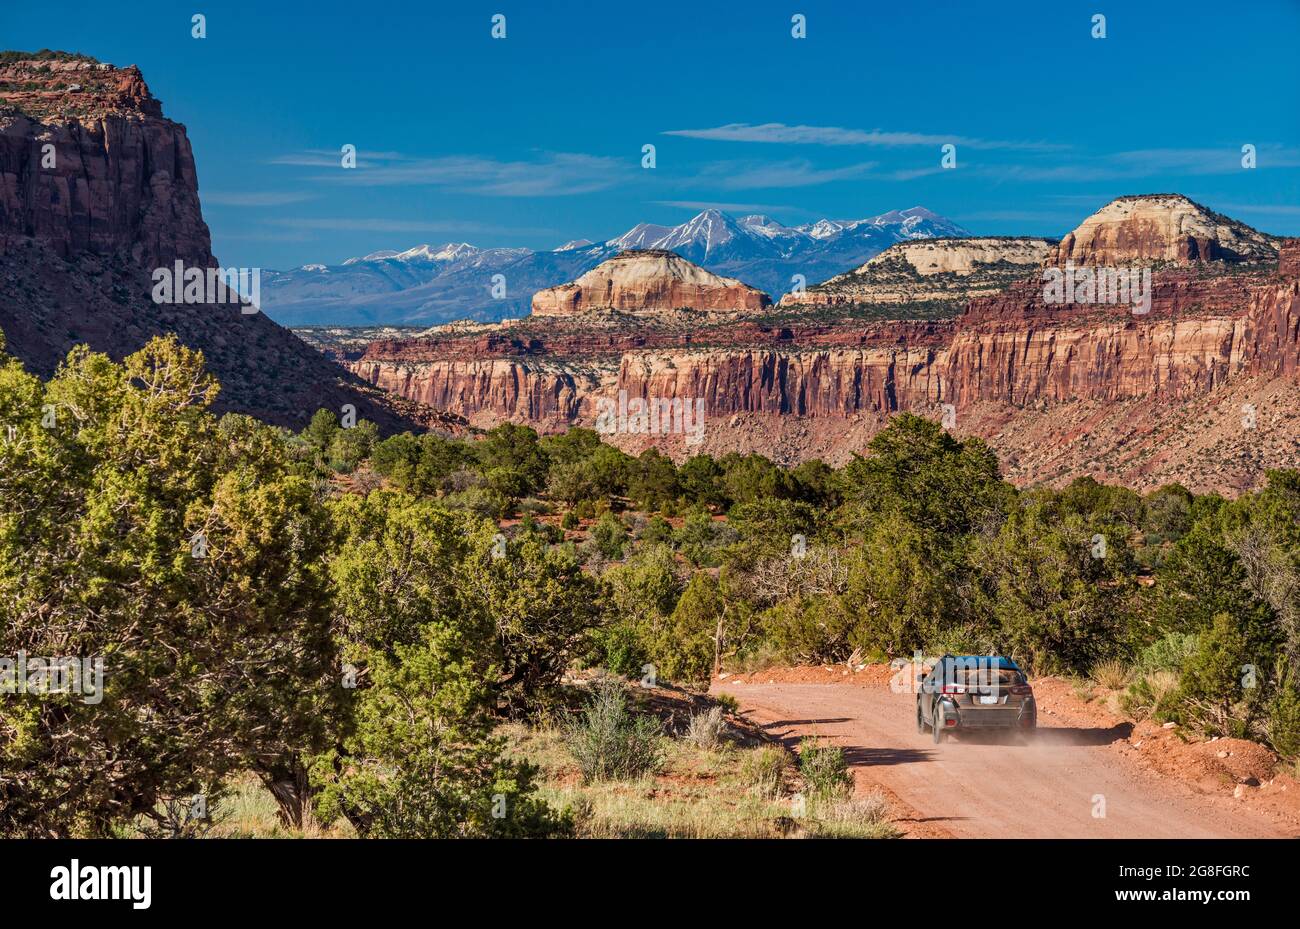 Beef Basin Road, Shay Mesa, Cottonwood Creek Canyon, la SAL Mtns in dist, 40 miglia a nord-est, Bears Ears National Monument, Canyonlands area, Utah, USA Foto Stock